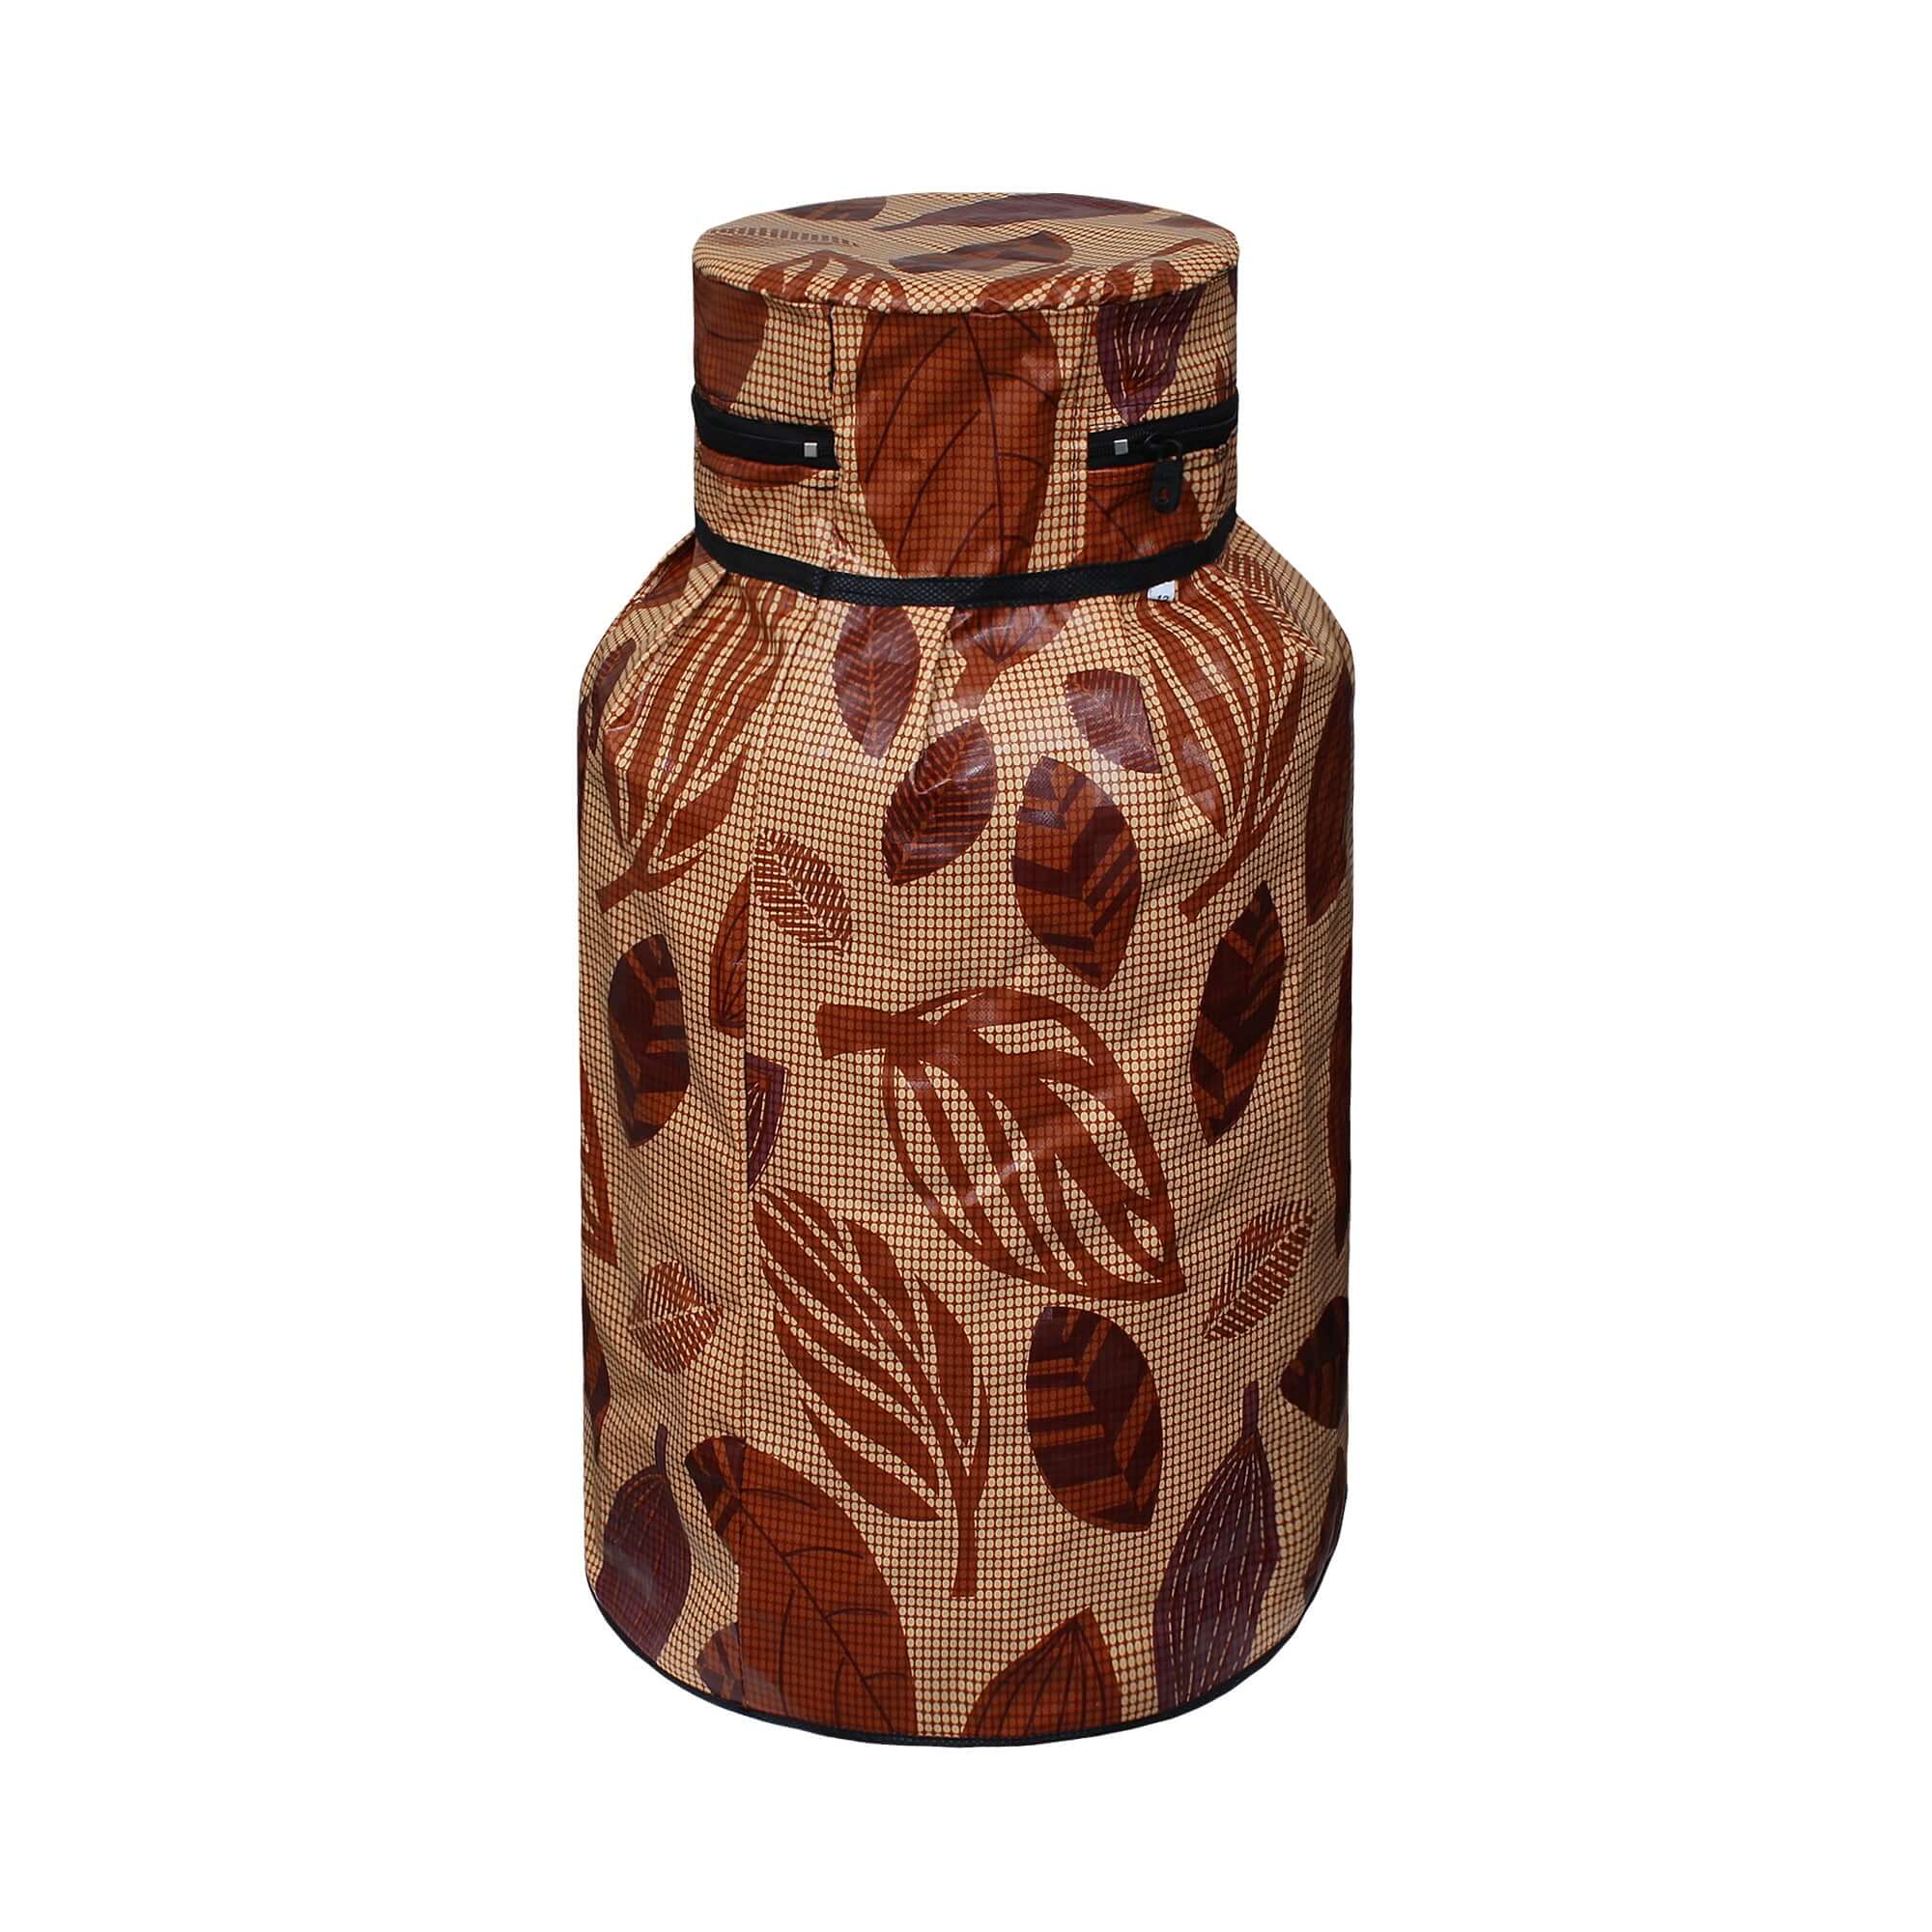 LPG Gas Cylinder Cover, SA19 - Dream Care Furnishings Private Limited